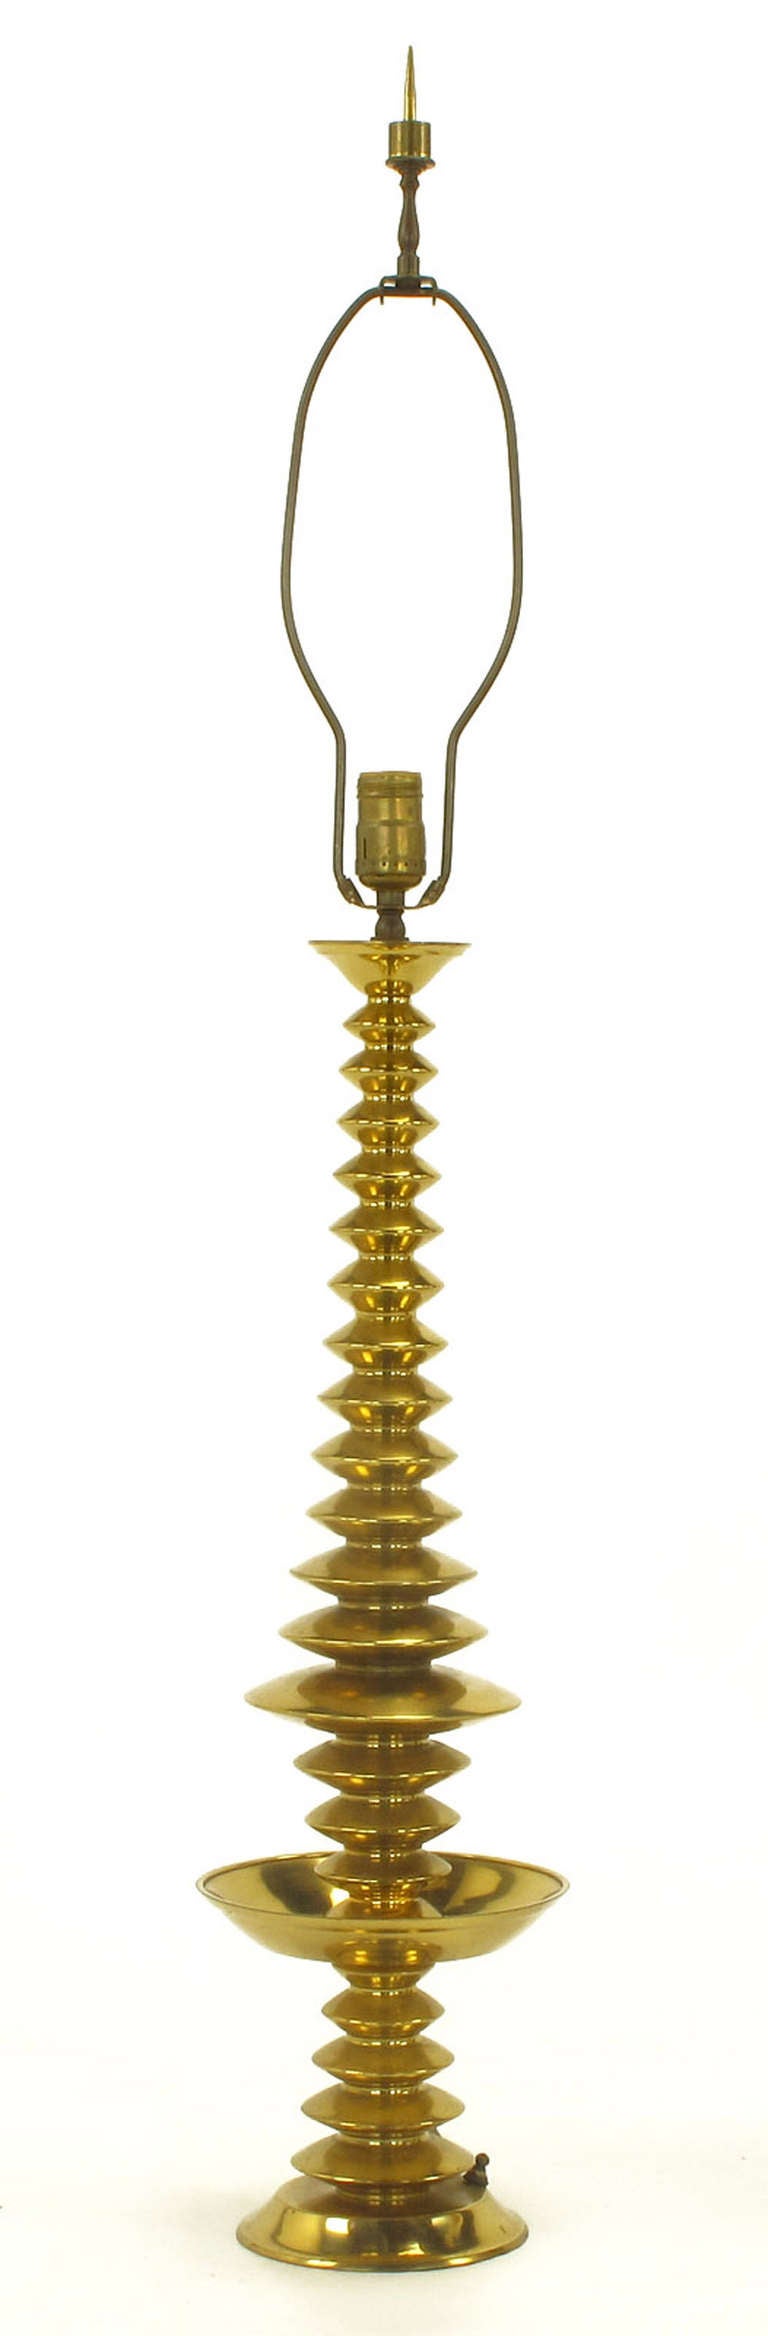 Mid-20th Century Pair of Brass Art Deco, Stacked Discs Table Lamps with Capiz Shell Shades